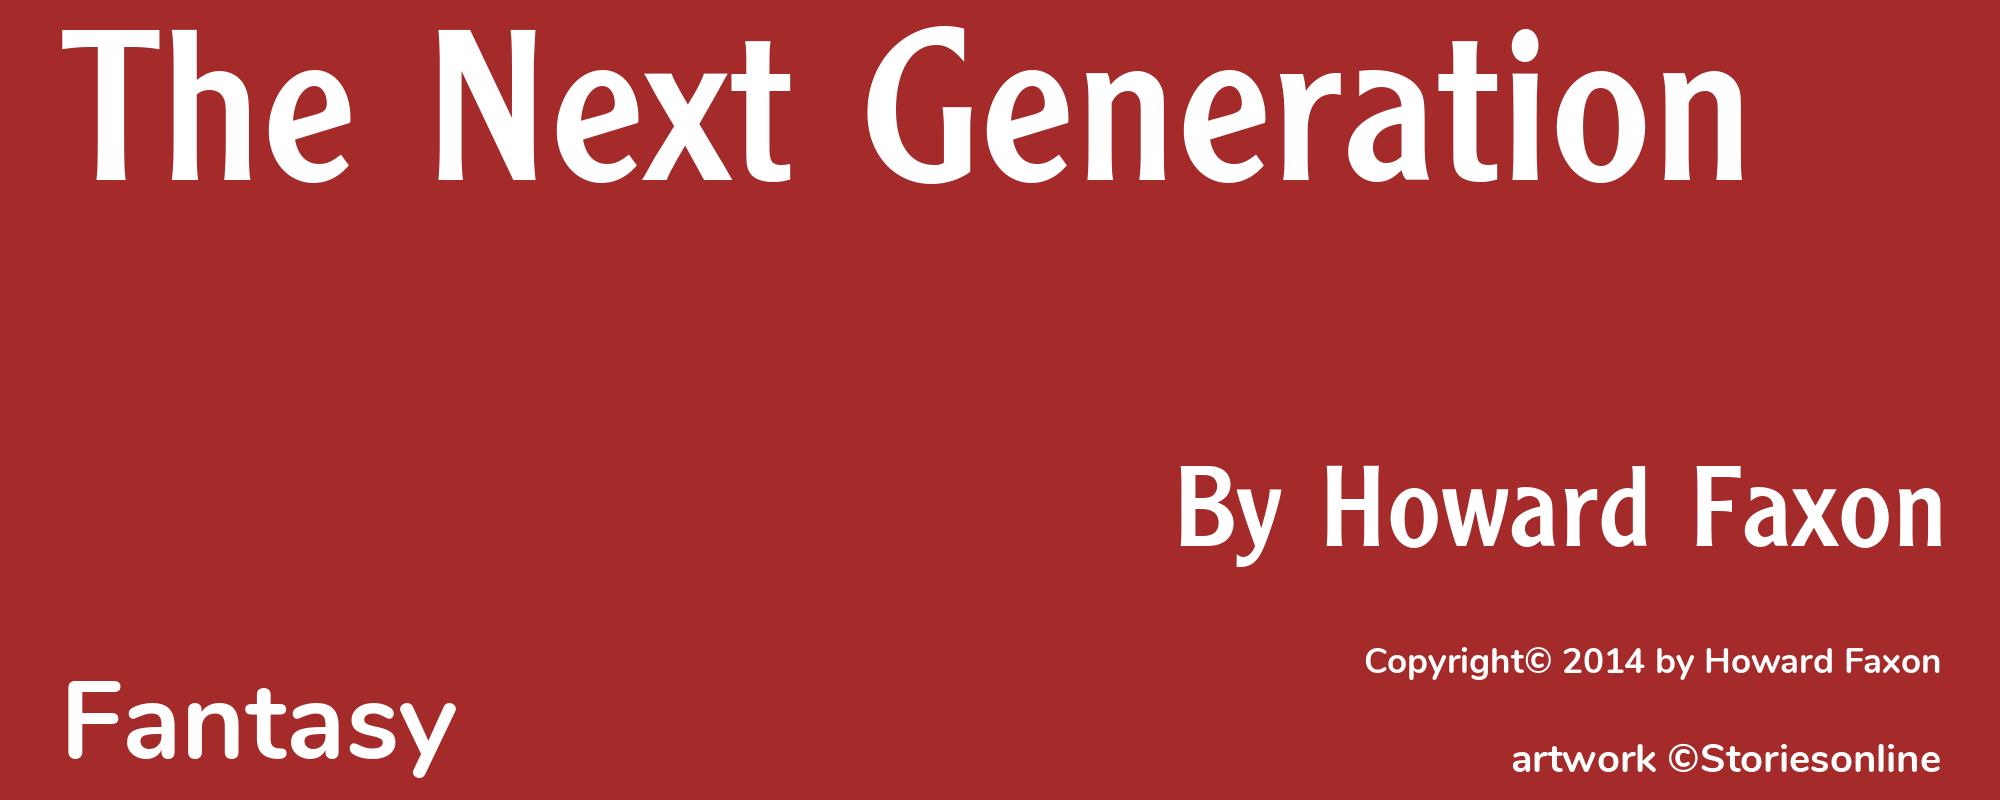 The Next Generation - Cover